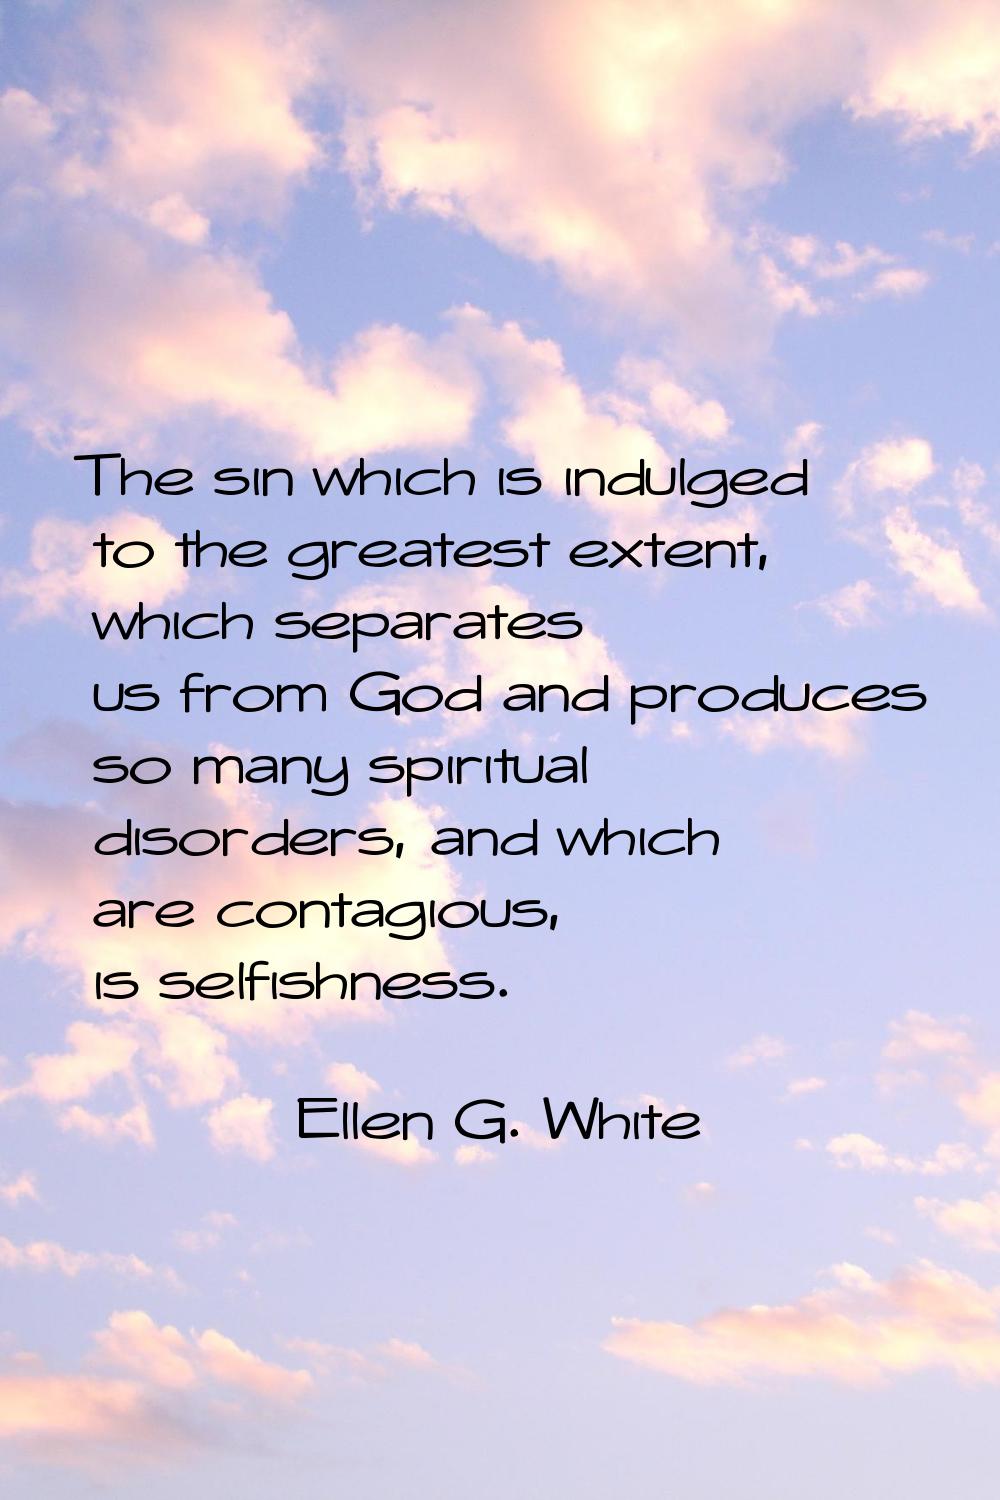 The sin which is indulged to the greatest extent, which separates us from God and produces so many 